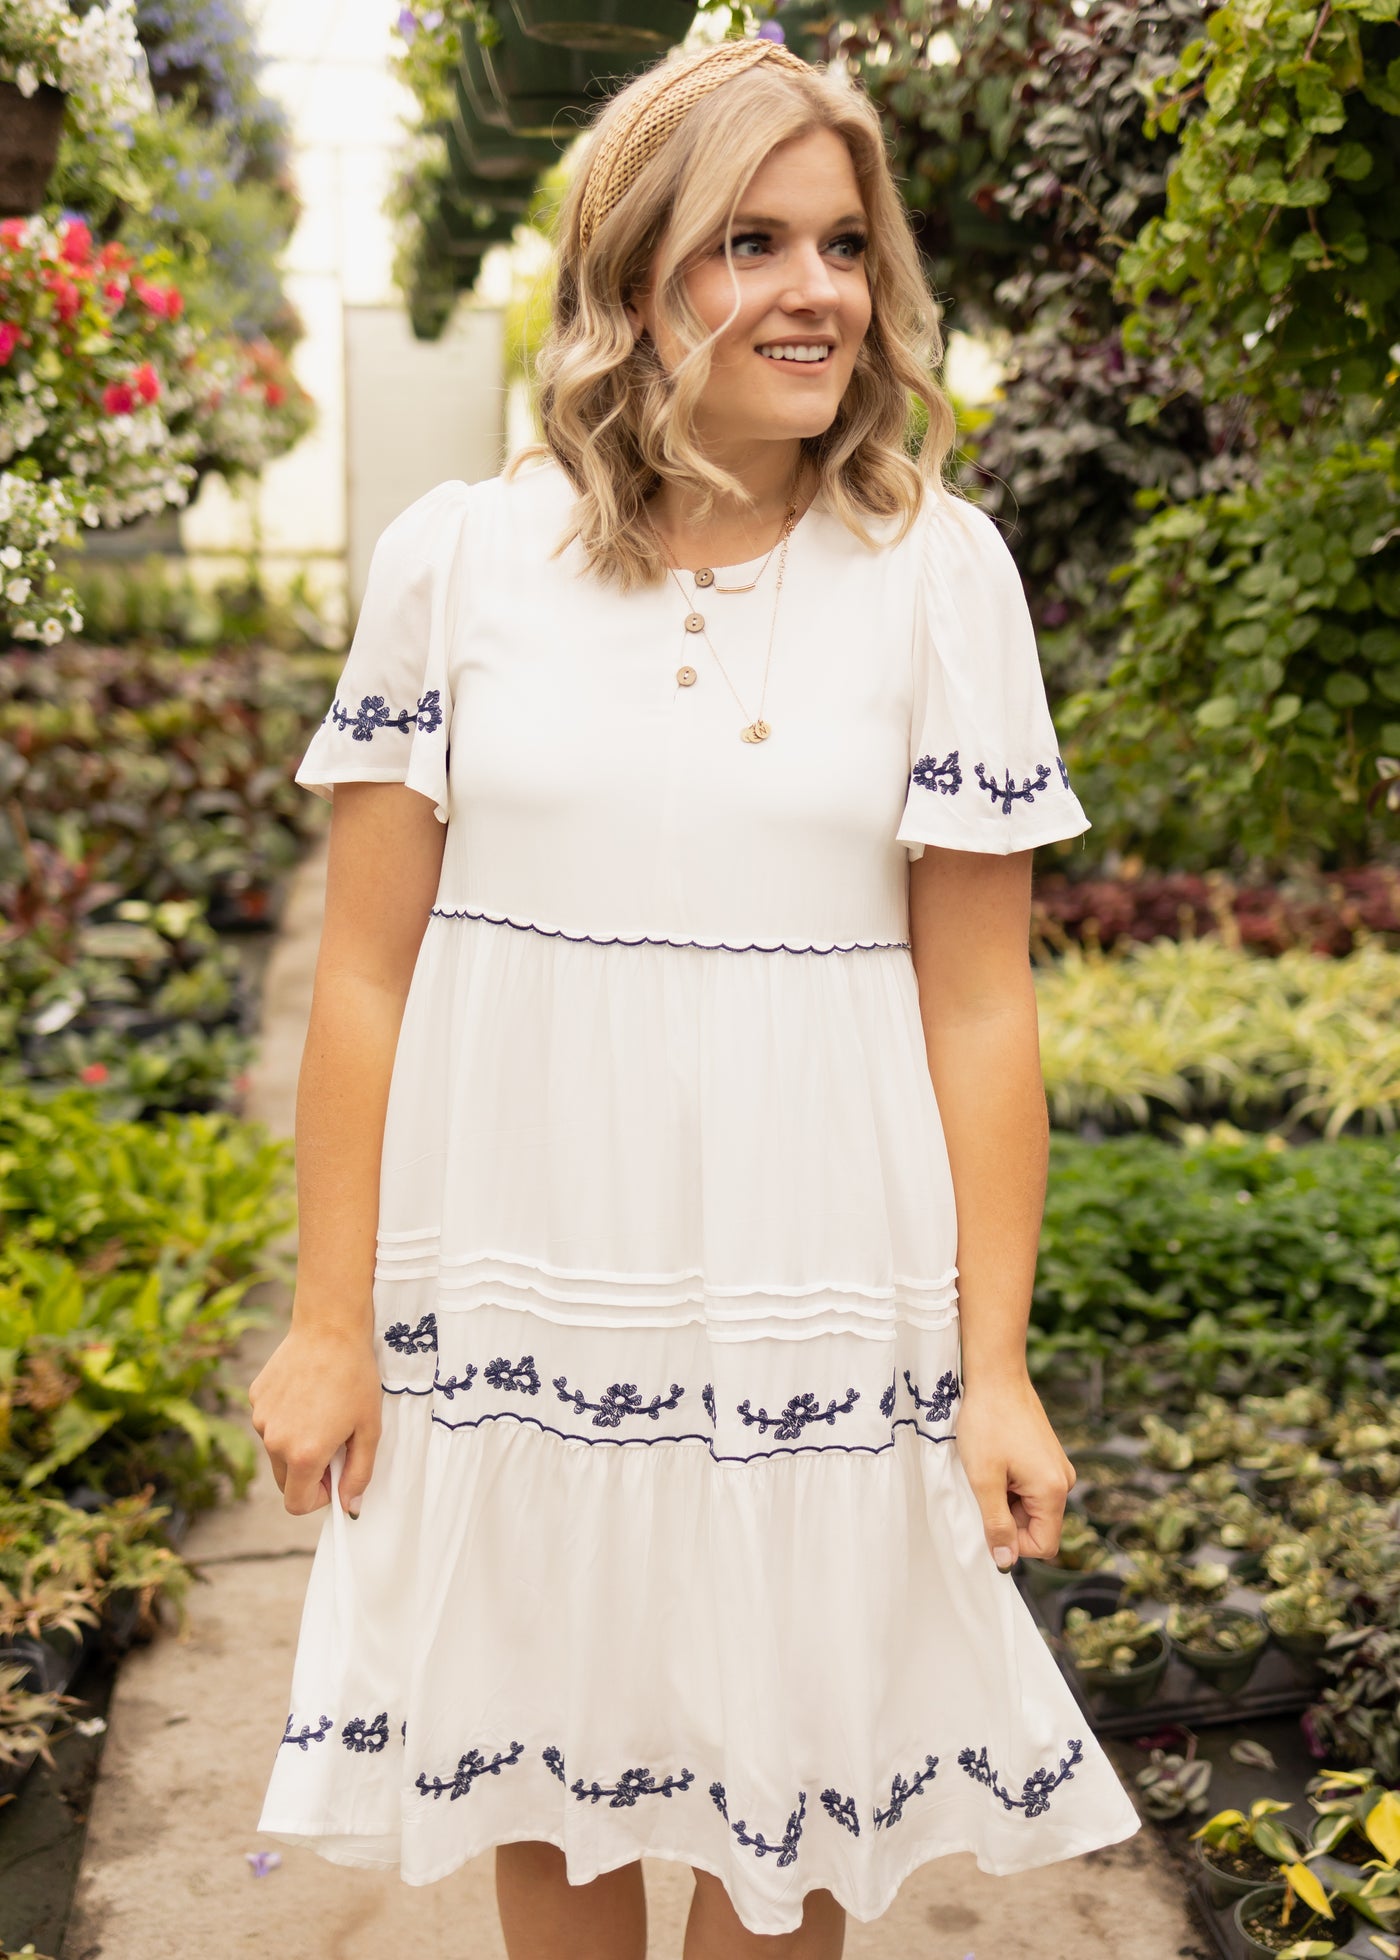 Below the knee white dress with blue embroidery